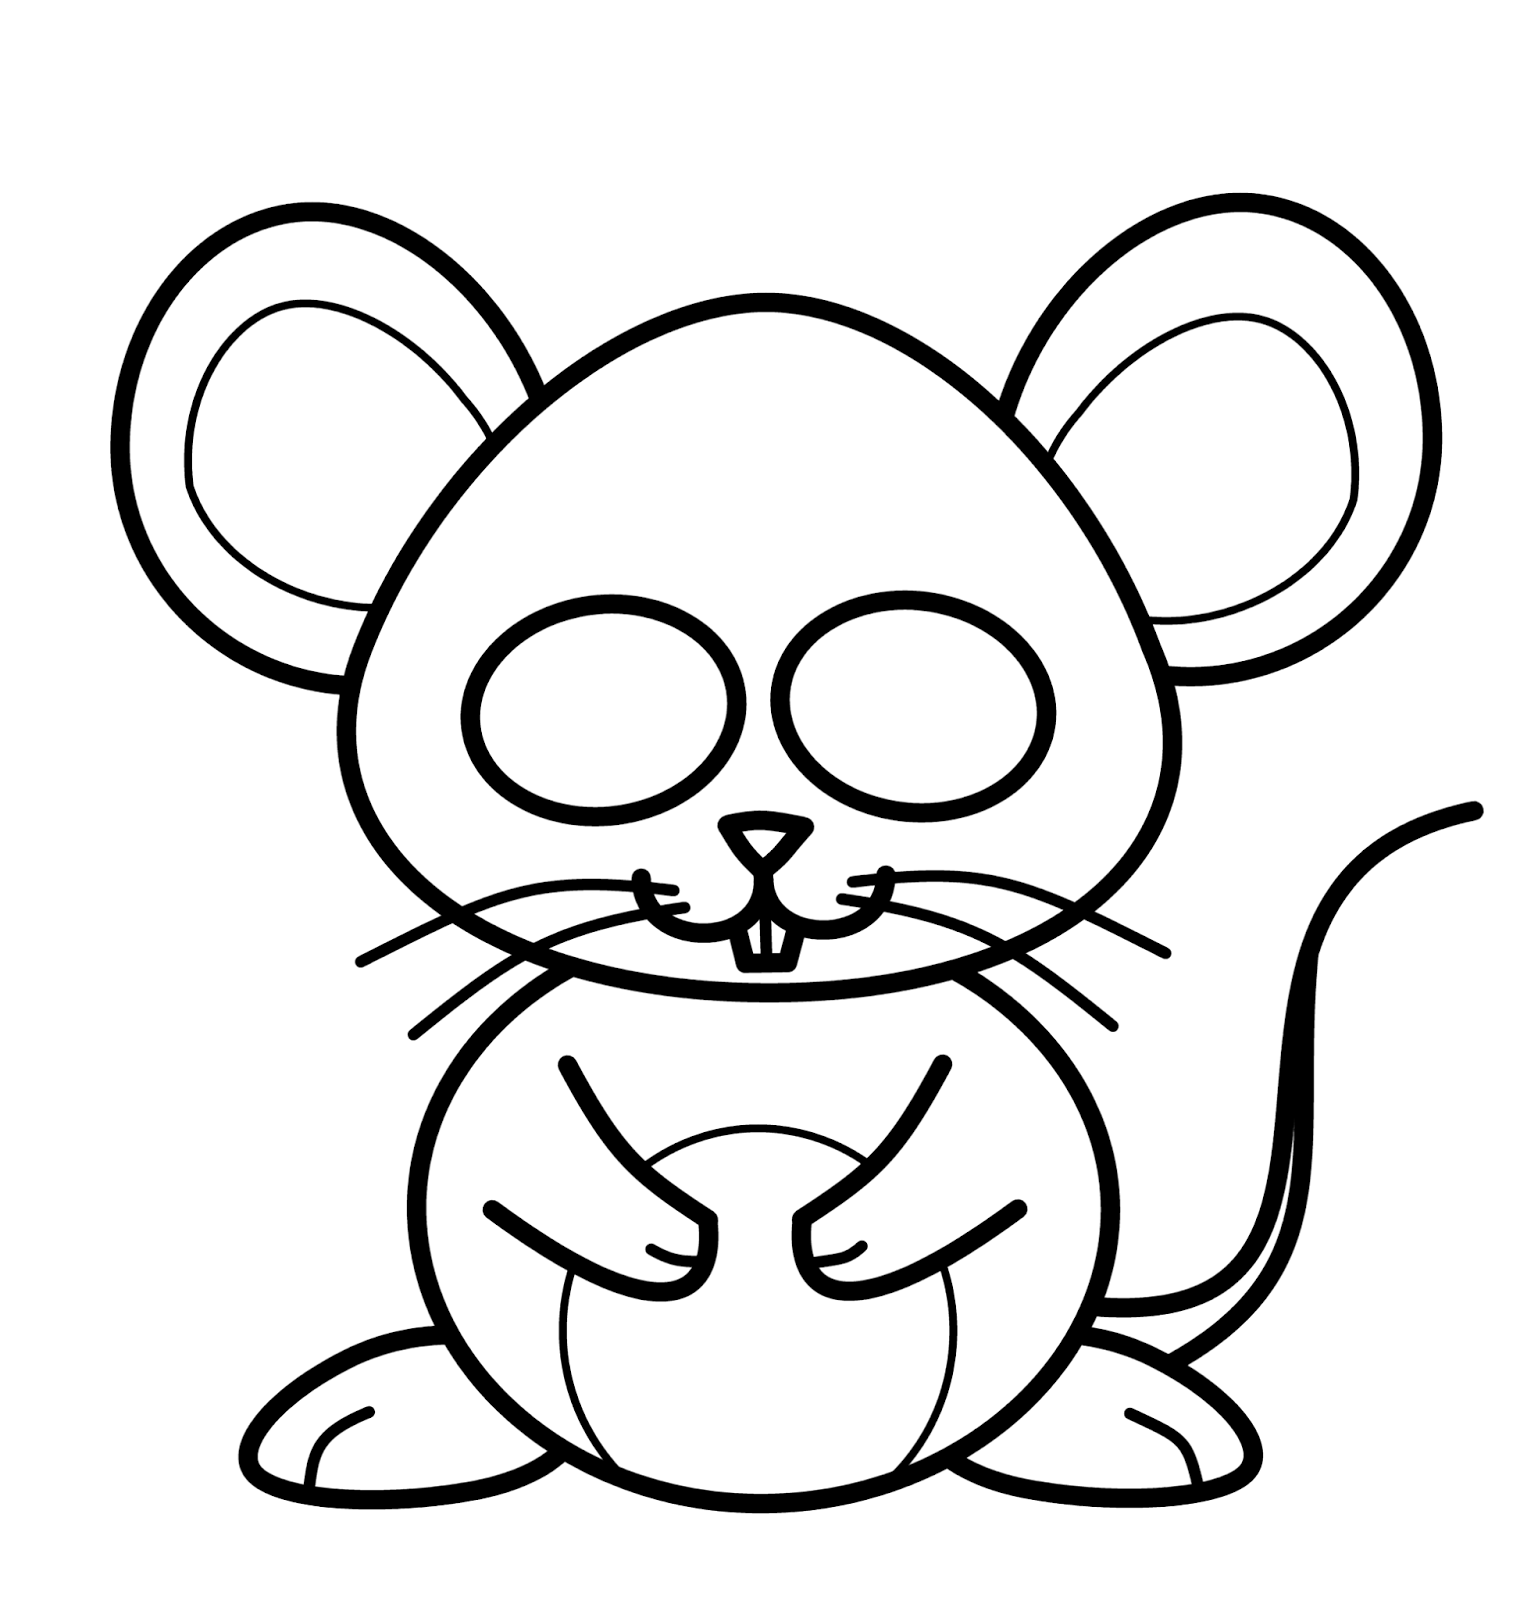 How To Draw A Cartoon Mouse - ClipArt Best